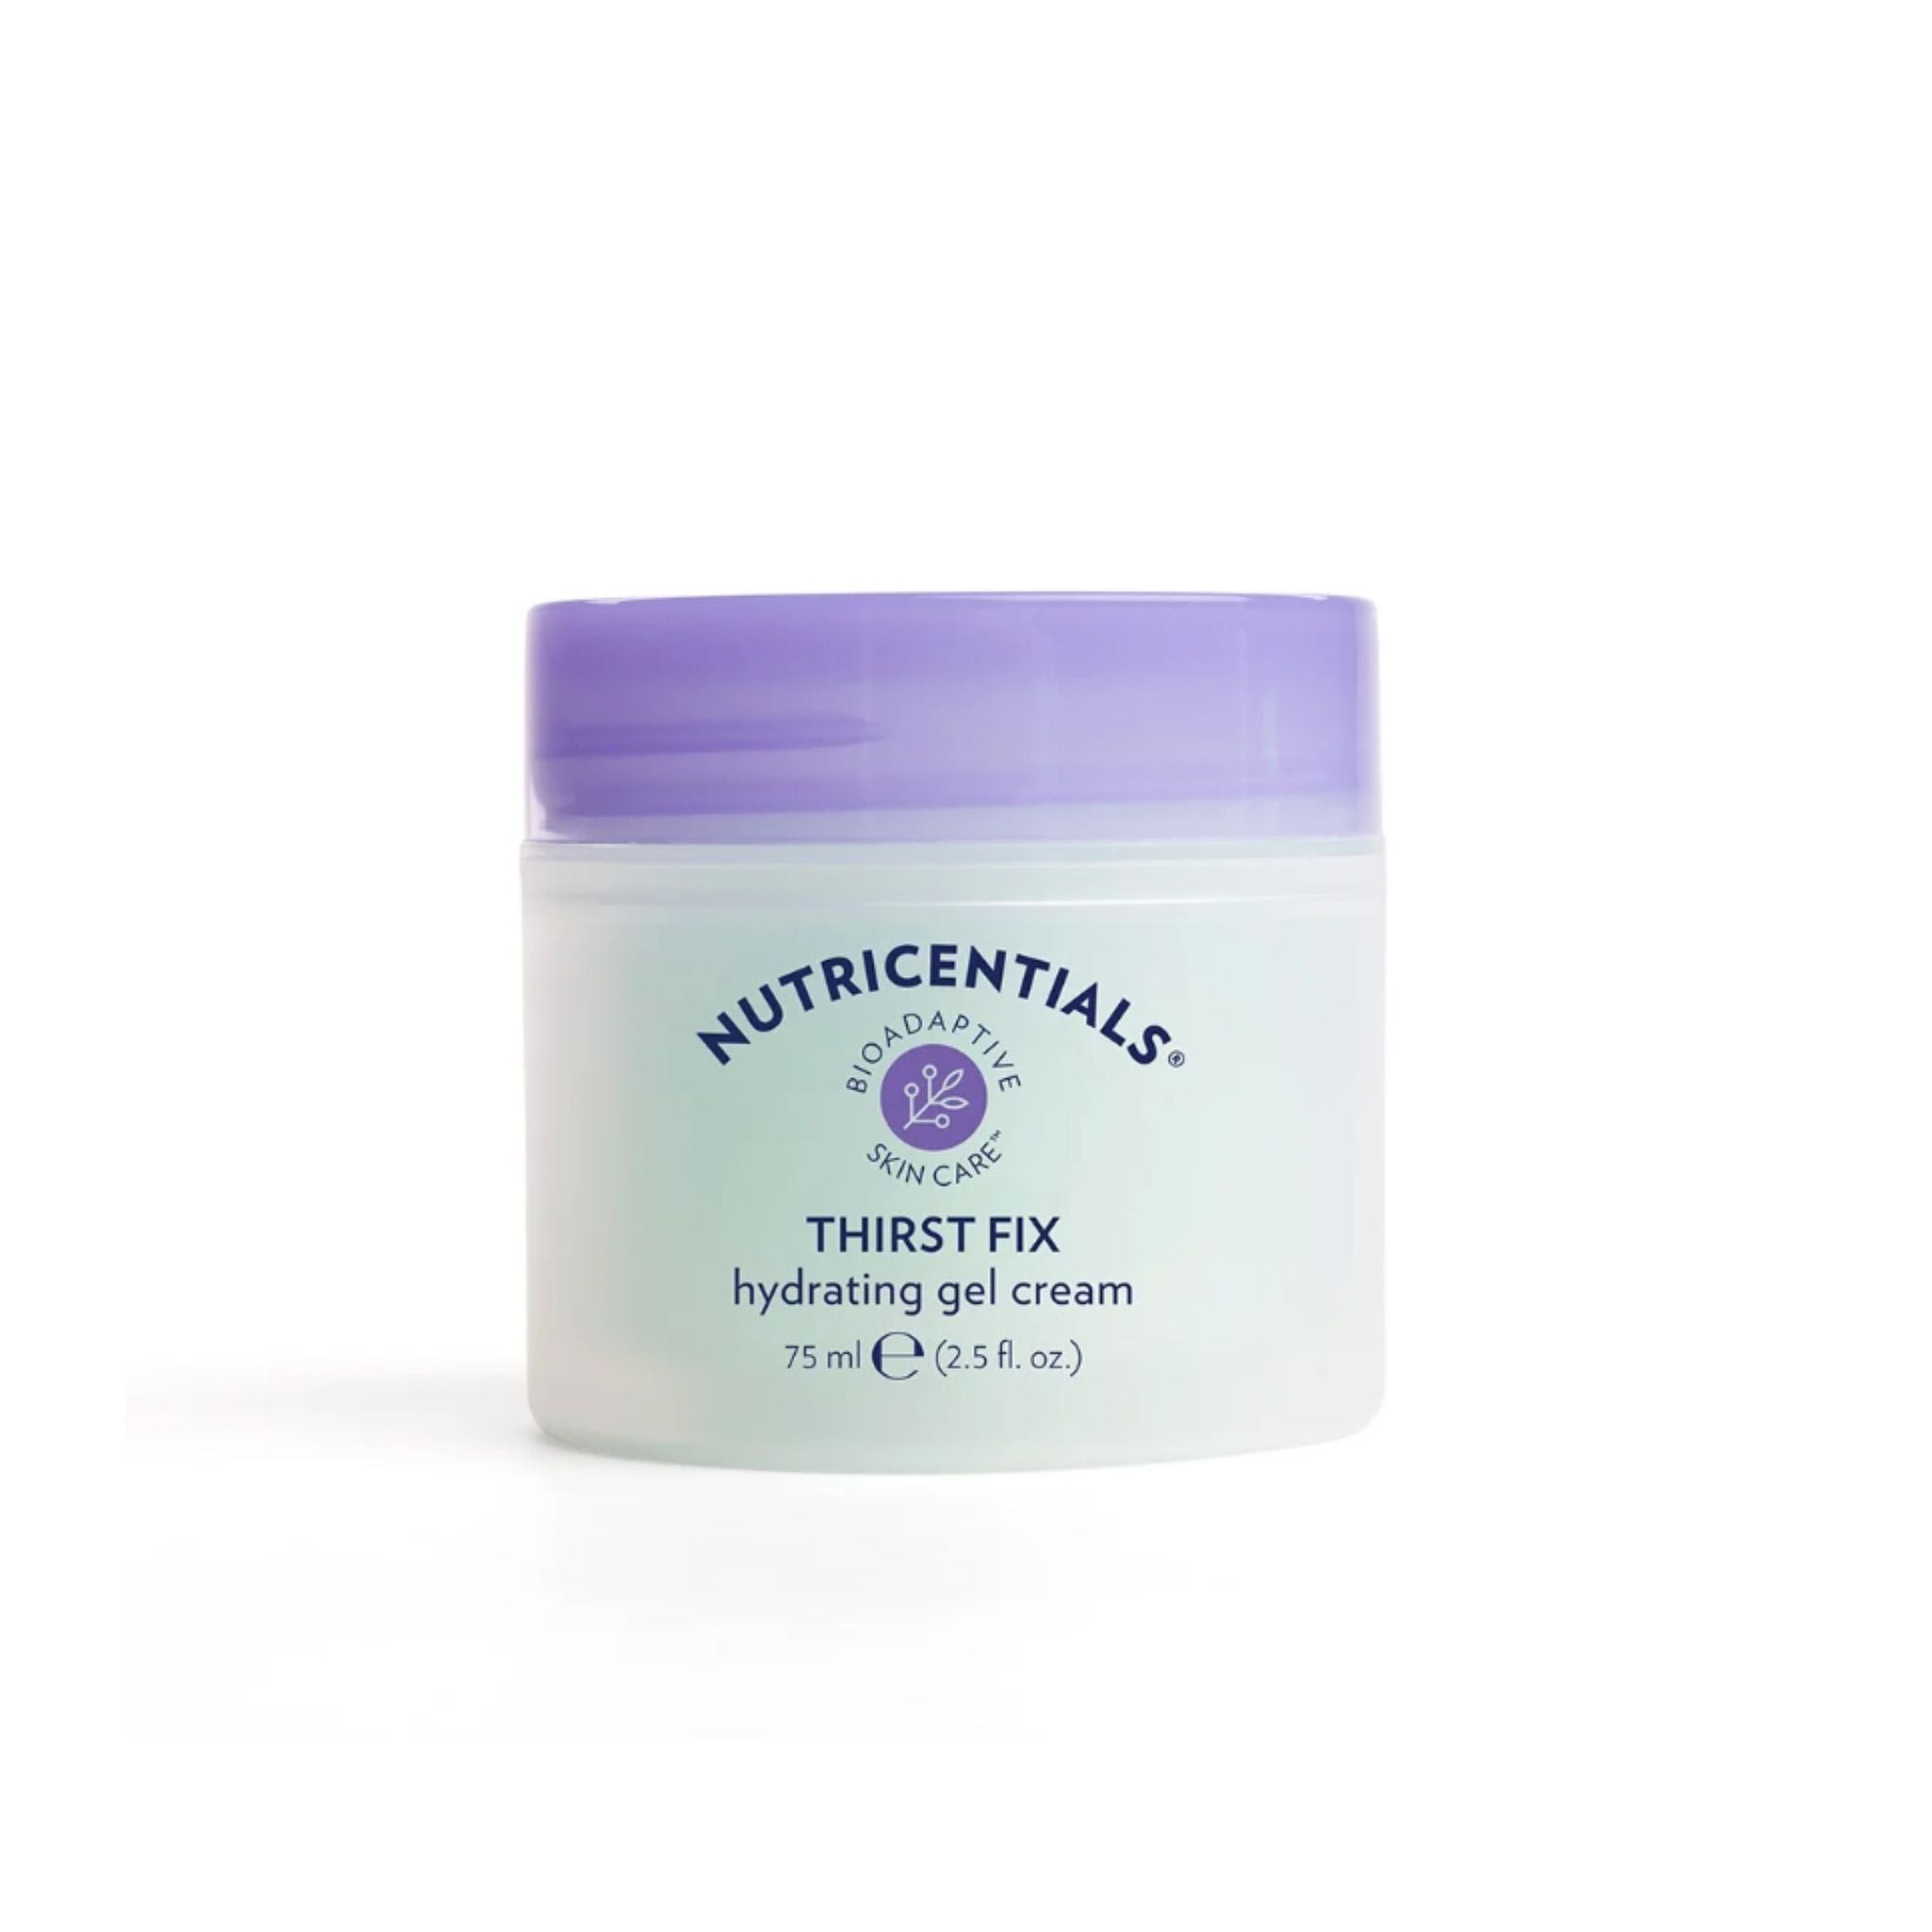 Thirst Fix Hydrating Gel Cream with Biomimetic Moisturizing Complex, Cats Whisker - thatnatureworld